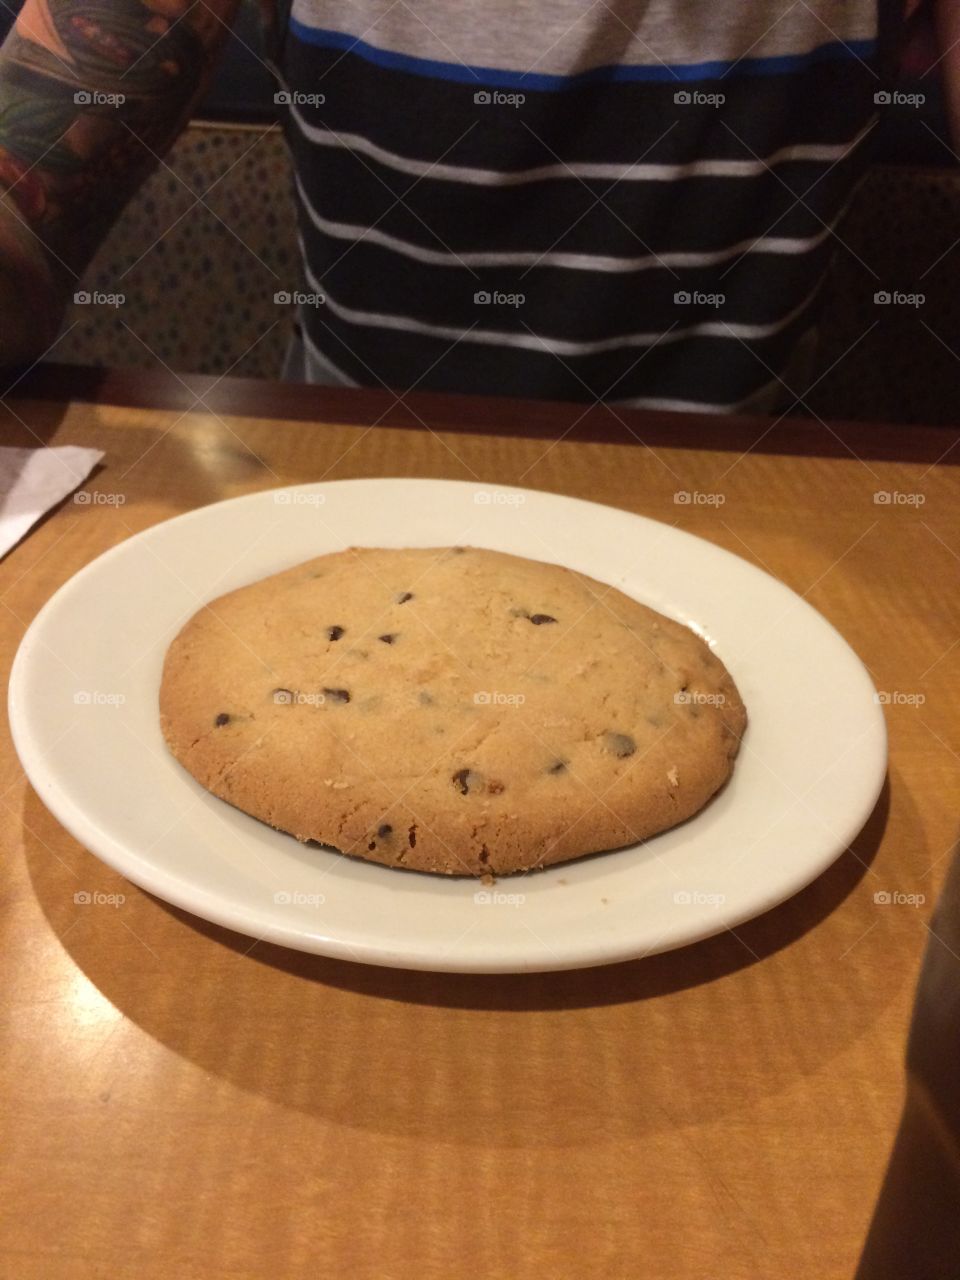 Cookie on a plate